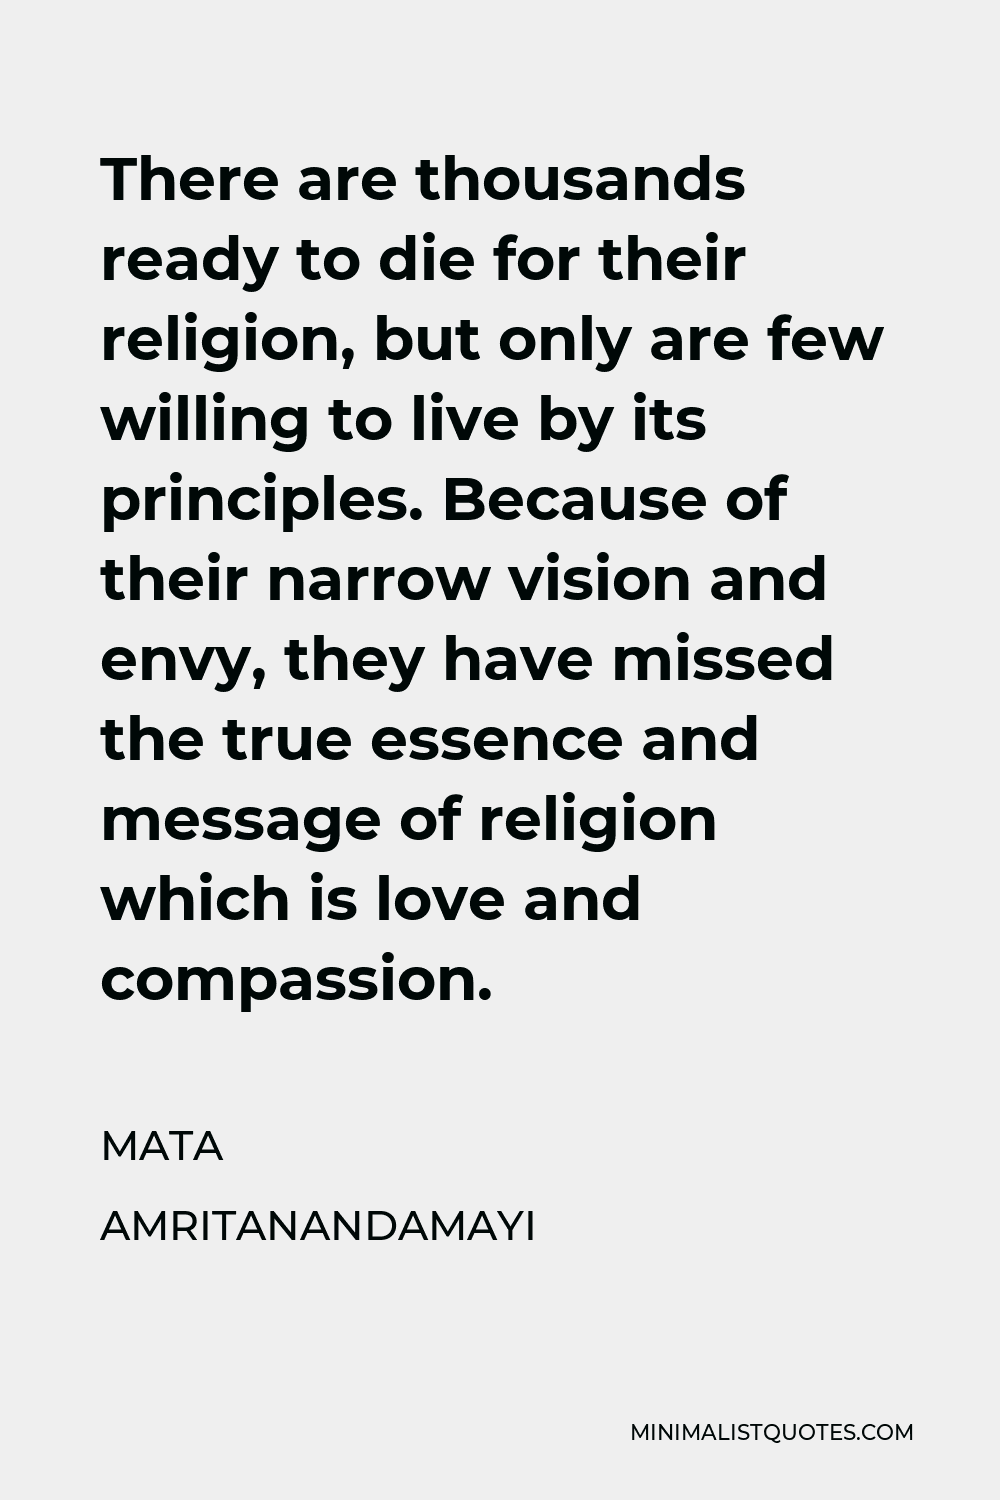 Mata Amritanandamayi Quote - There are thousands ready to die for their religion, but only are few willing to live by its principles. Because of their narrow vision and envy, they have missed the true essence and message of religion which is love and compassion.